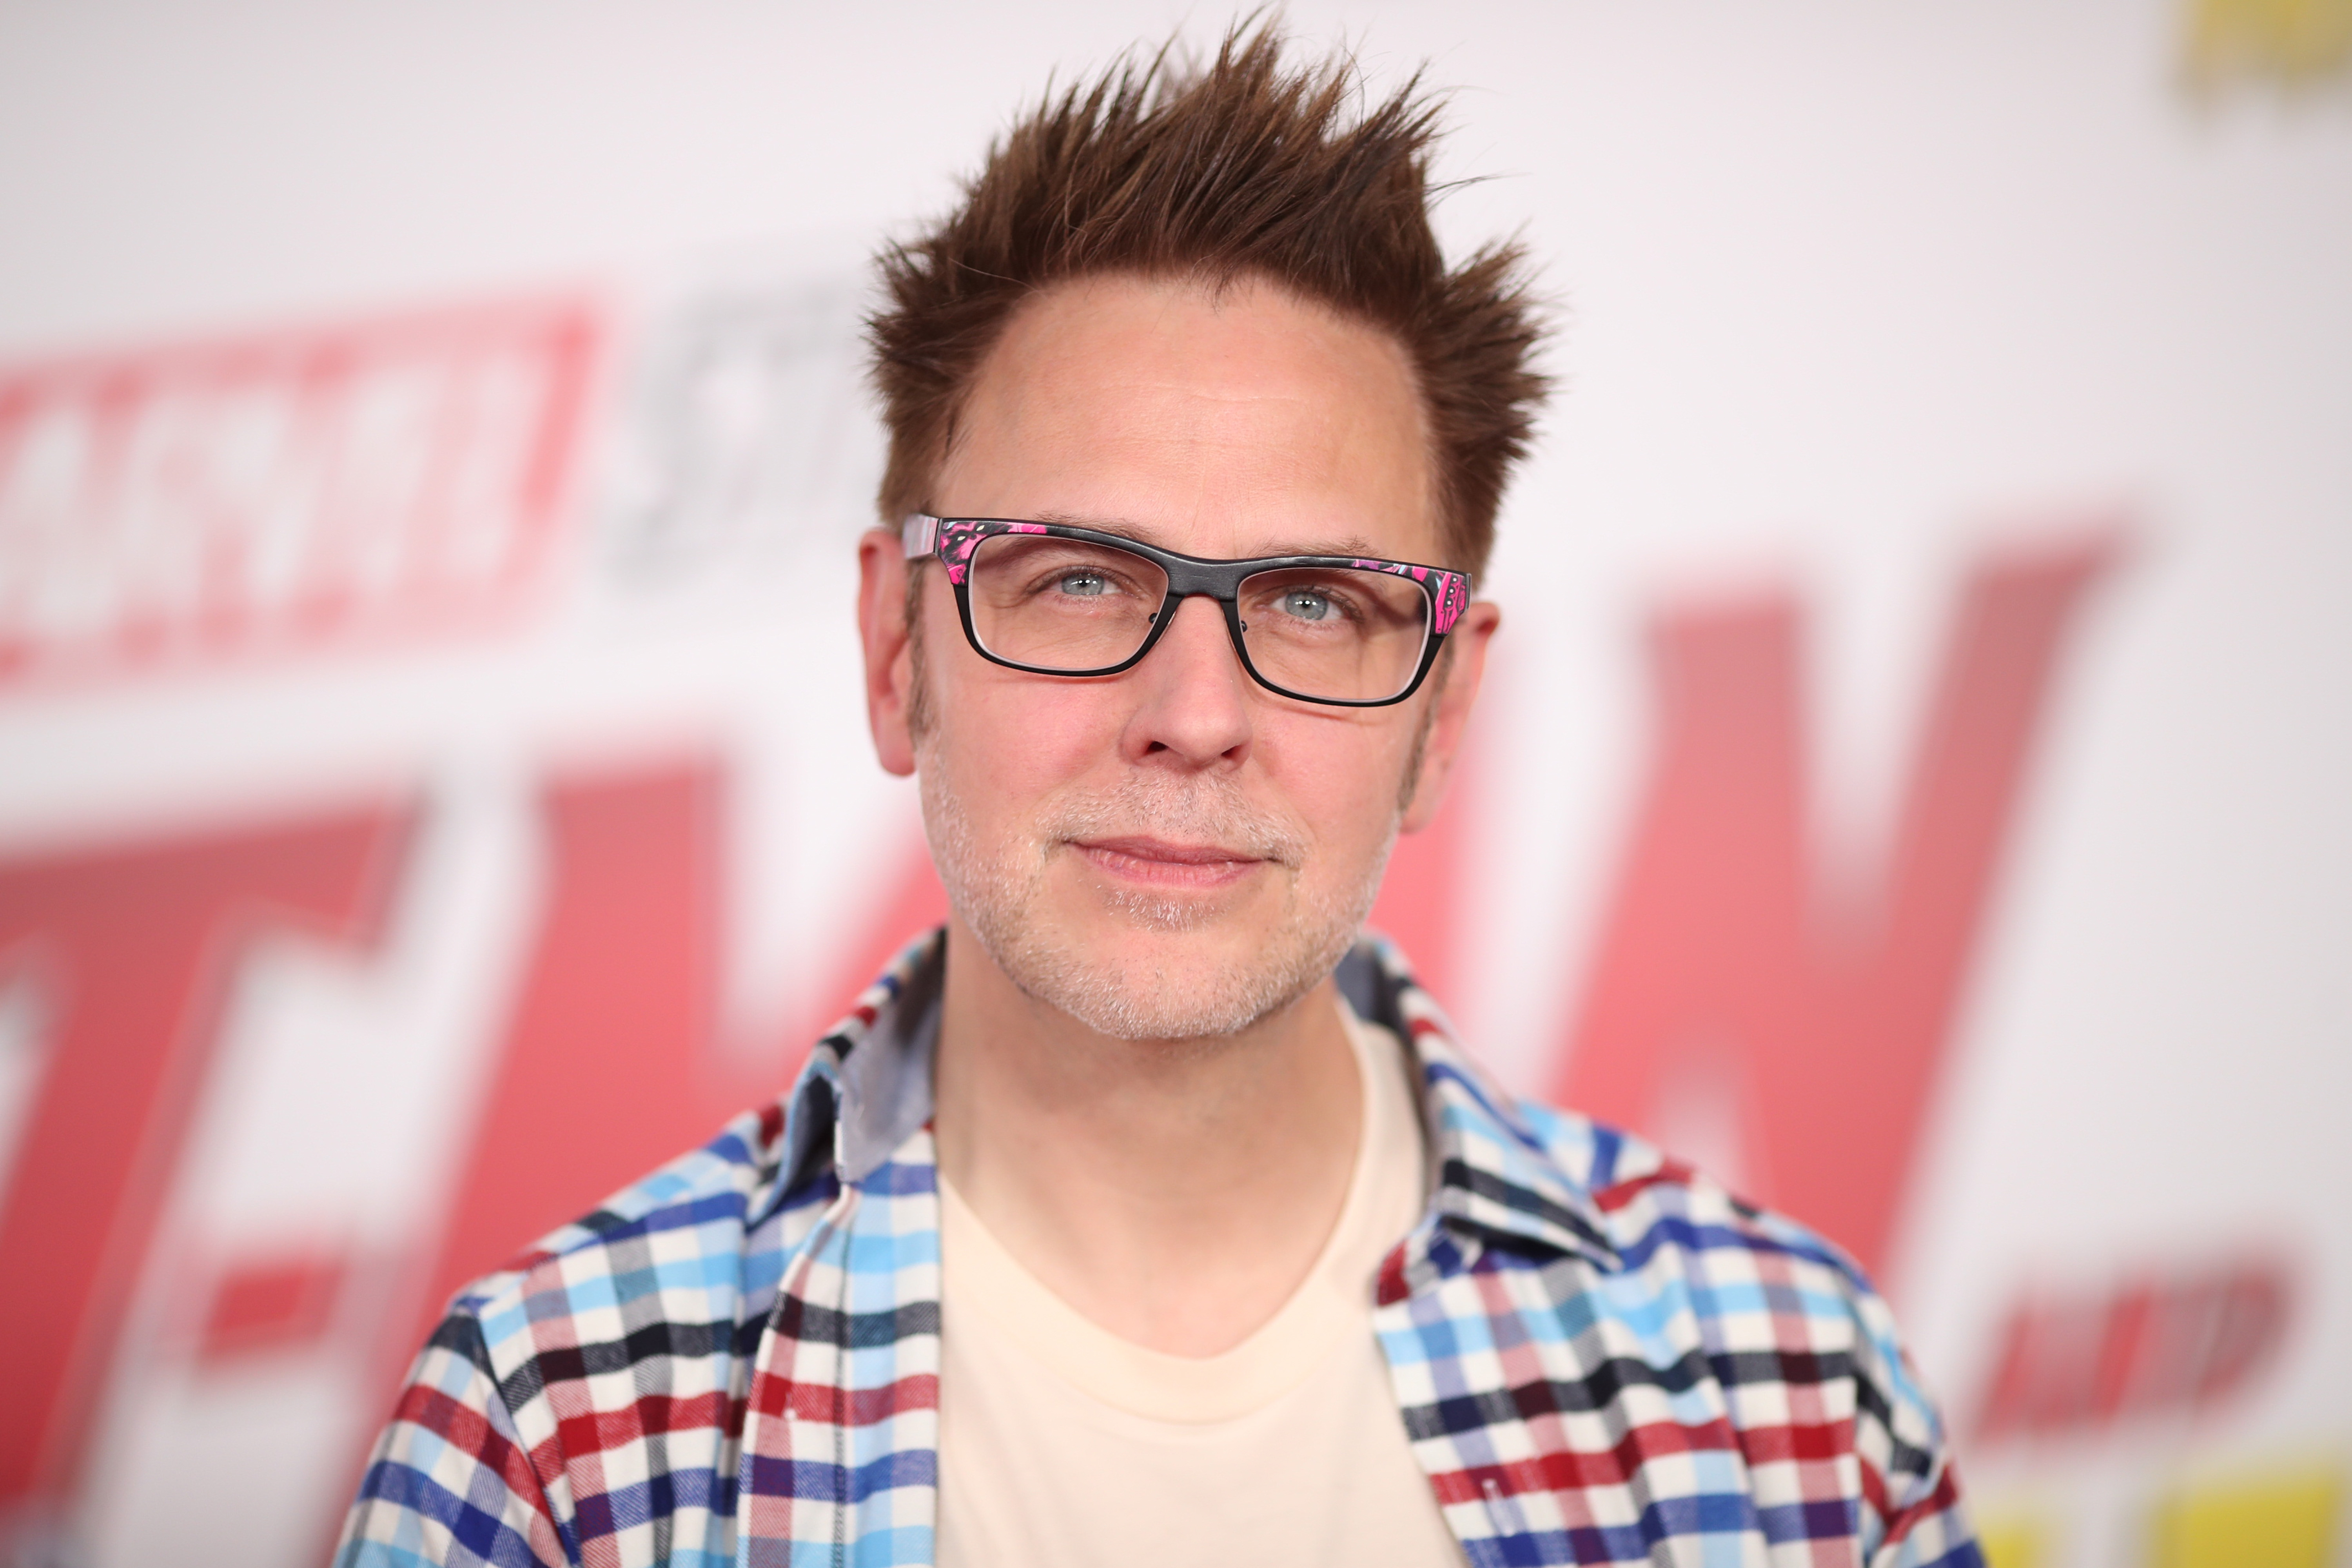 James Gunn Says “Guardians Vol. 3” & “The Suicide Squad” Will Not Be Delayed